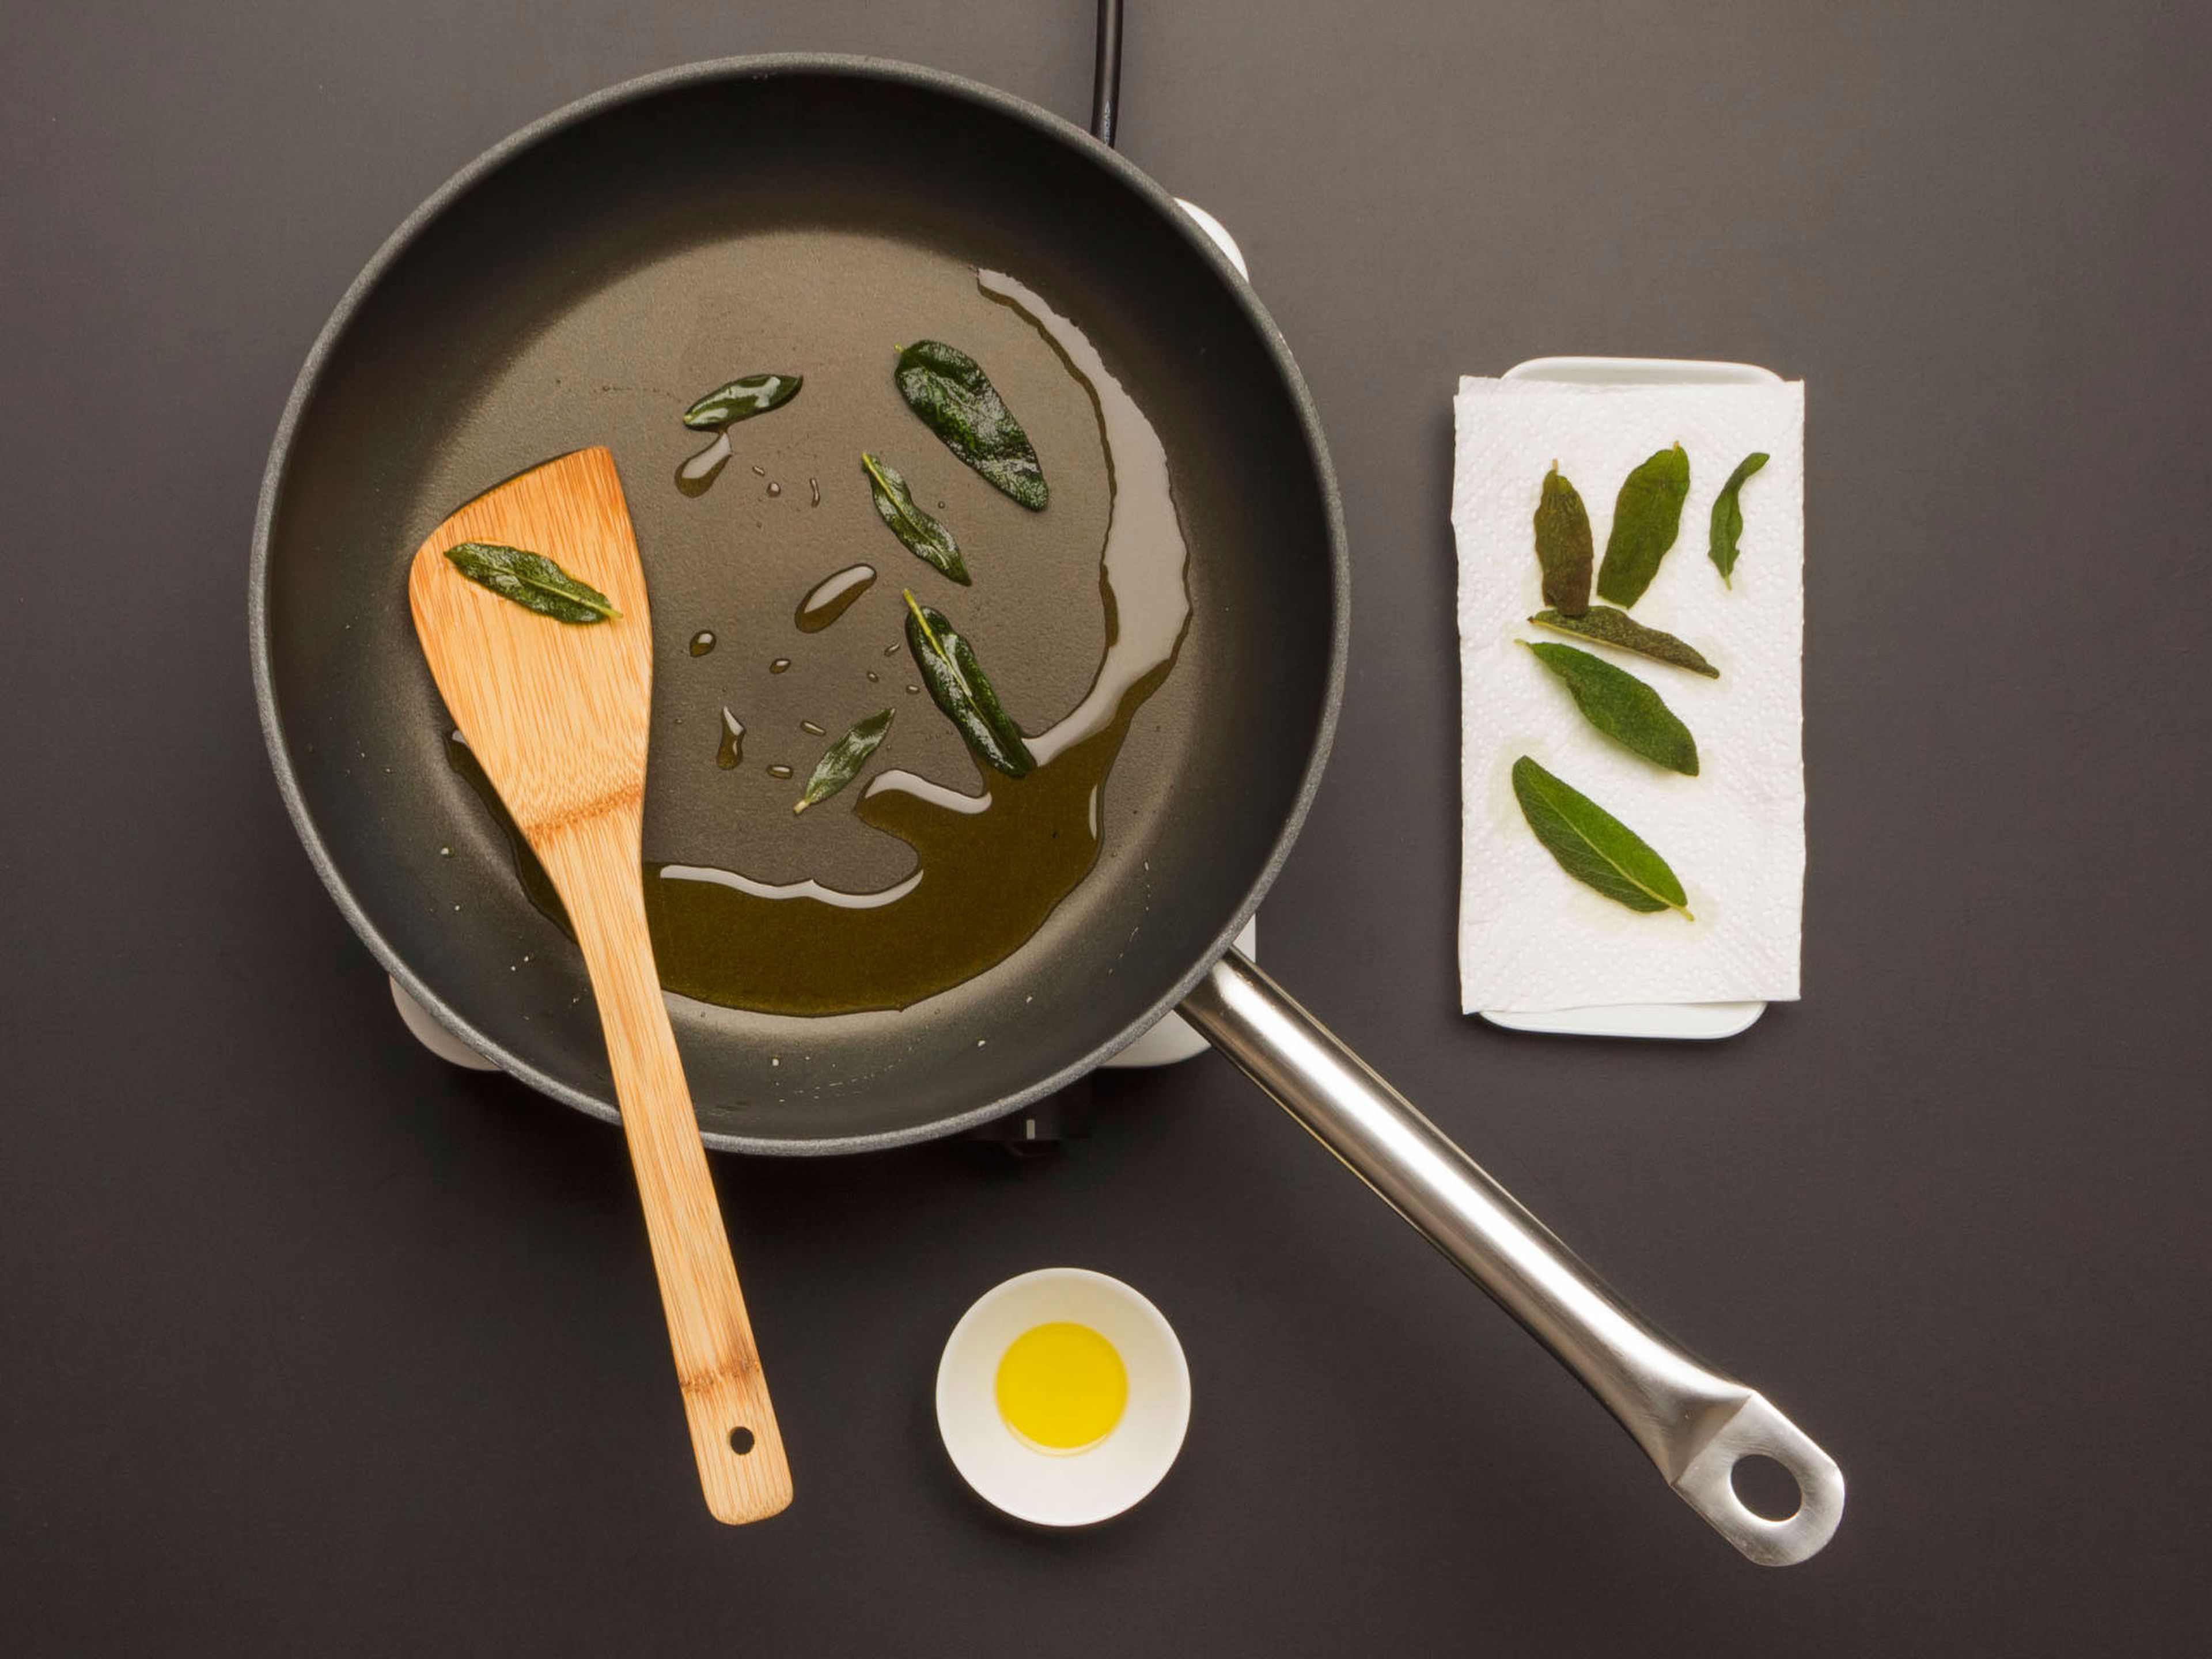 Heat up olive oil in a large frying pan over high heat. Add sage leaves to pan and cook for approx. 1 min. until crispy. Take care not to burn the leaves! Transfer to a paper towel-lined plate to dry. Keep oil in pan.